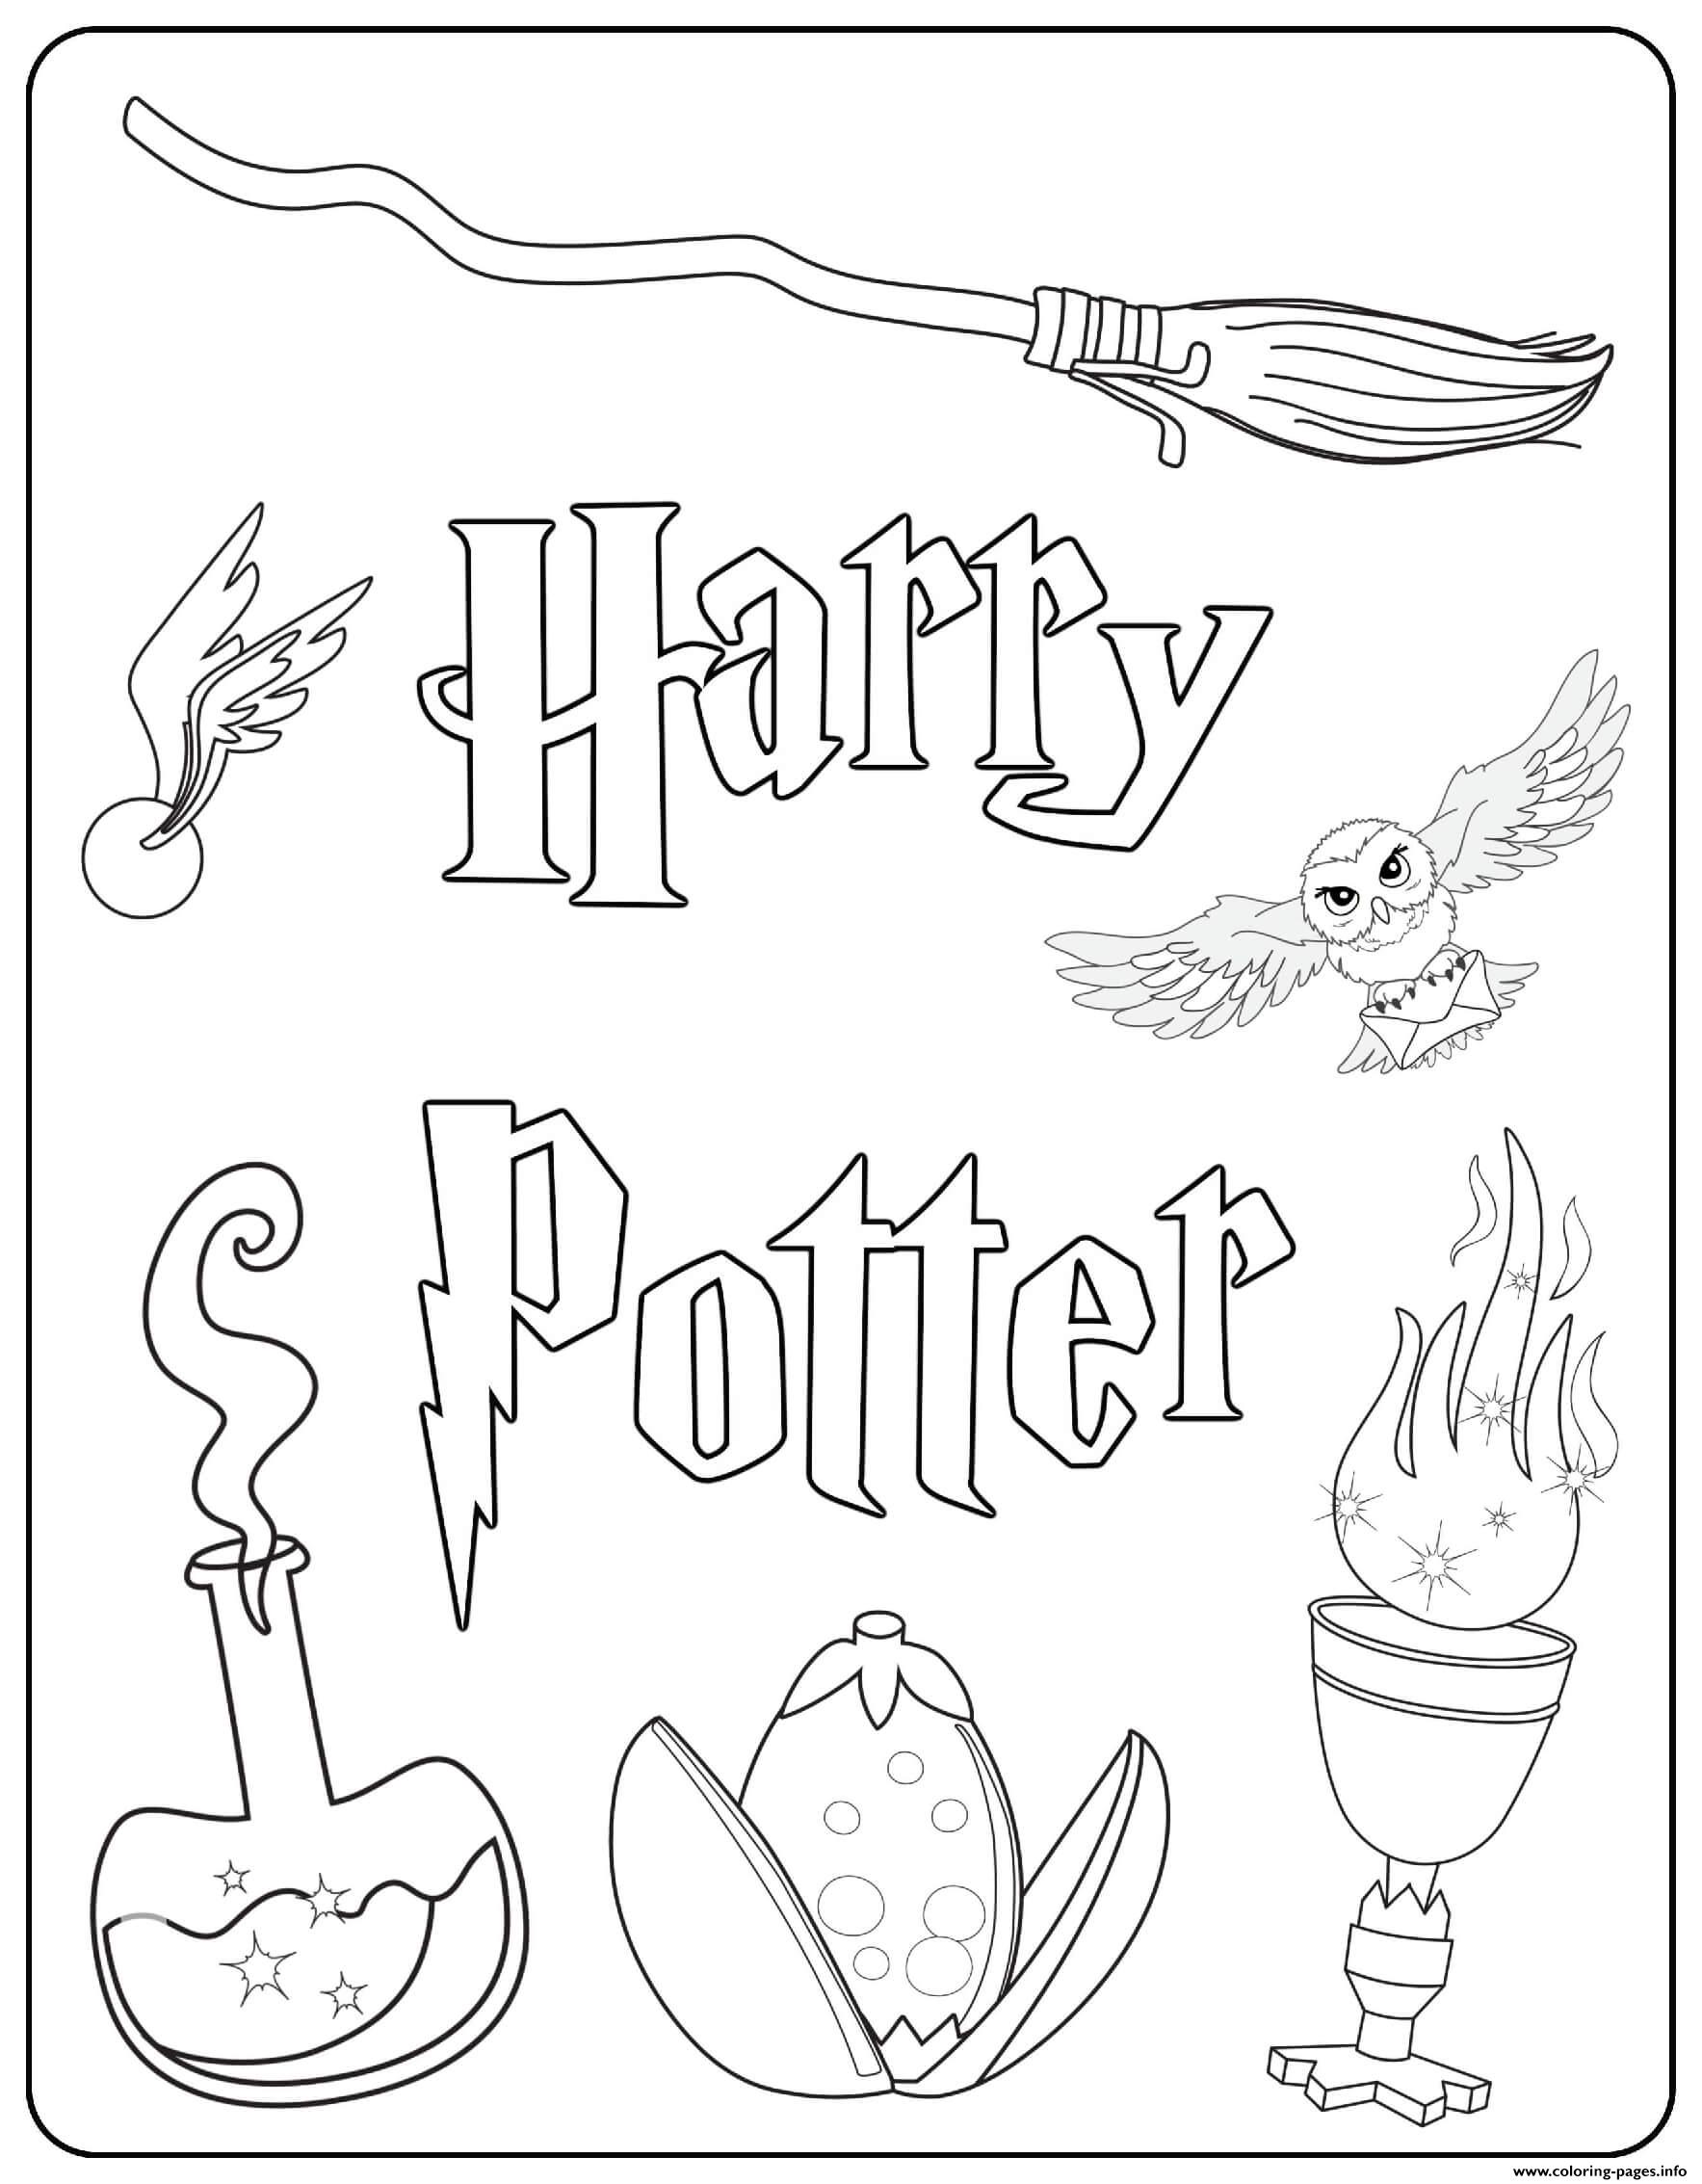 Harry Potter Images coloring